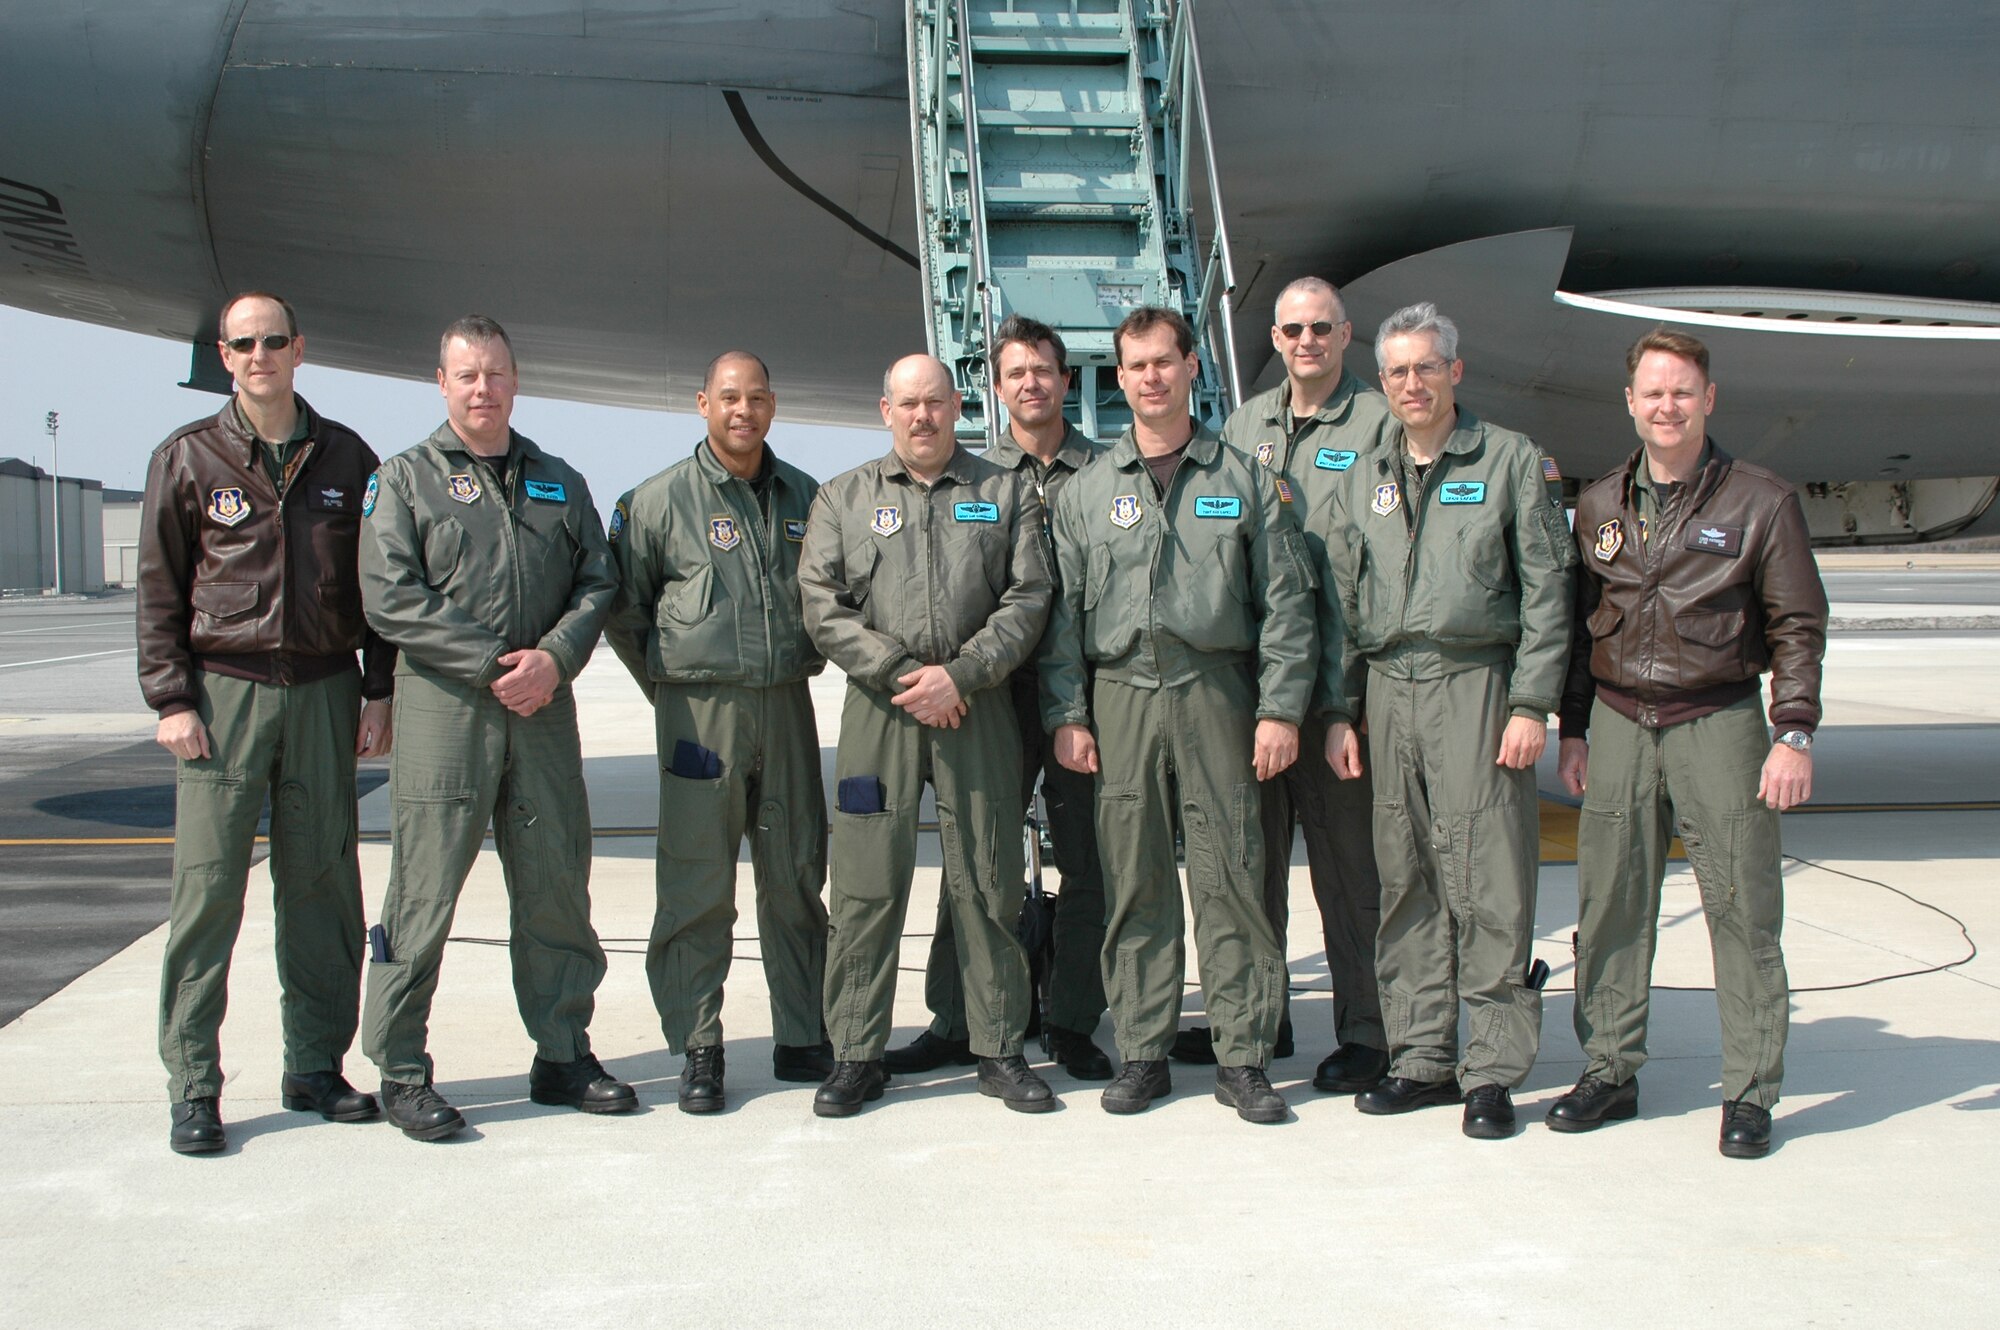 The aircrew for the 326th Airlift Squadron's final C-5 Galaxy flight on March 10 were, from left, Lt. Col. William Russell; Maj. Sterling Davis; Master Sgt. Gerald Mitchell; Chief Master Sgt. Donald Cunningham; Maj. Noel Soderlund; Tech. Sgt. Rod Lopez; Master Sgt. Chas Devine; Lt. Col. Craig LaFave; and Lt. Col. Louis Patriquin, aircraft commander. The 326th AS is a unit in the Air Force Reserve Command's 512th Airlfit Wing. The squadron, which has been flying the C-5 since 1973, is transitioning to the C-17 Globemaster III, scheduled to arrive in June. (U.S. Air Force photo/Tech. Sgt. Veronica A. Aceveda)